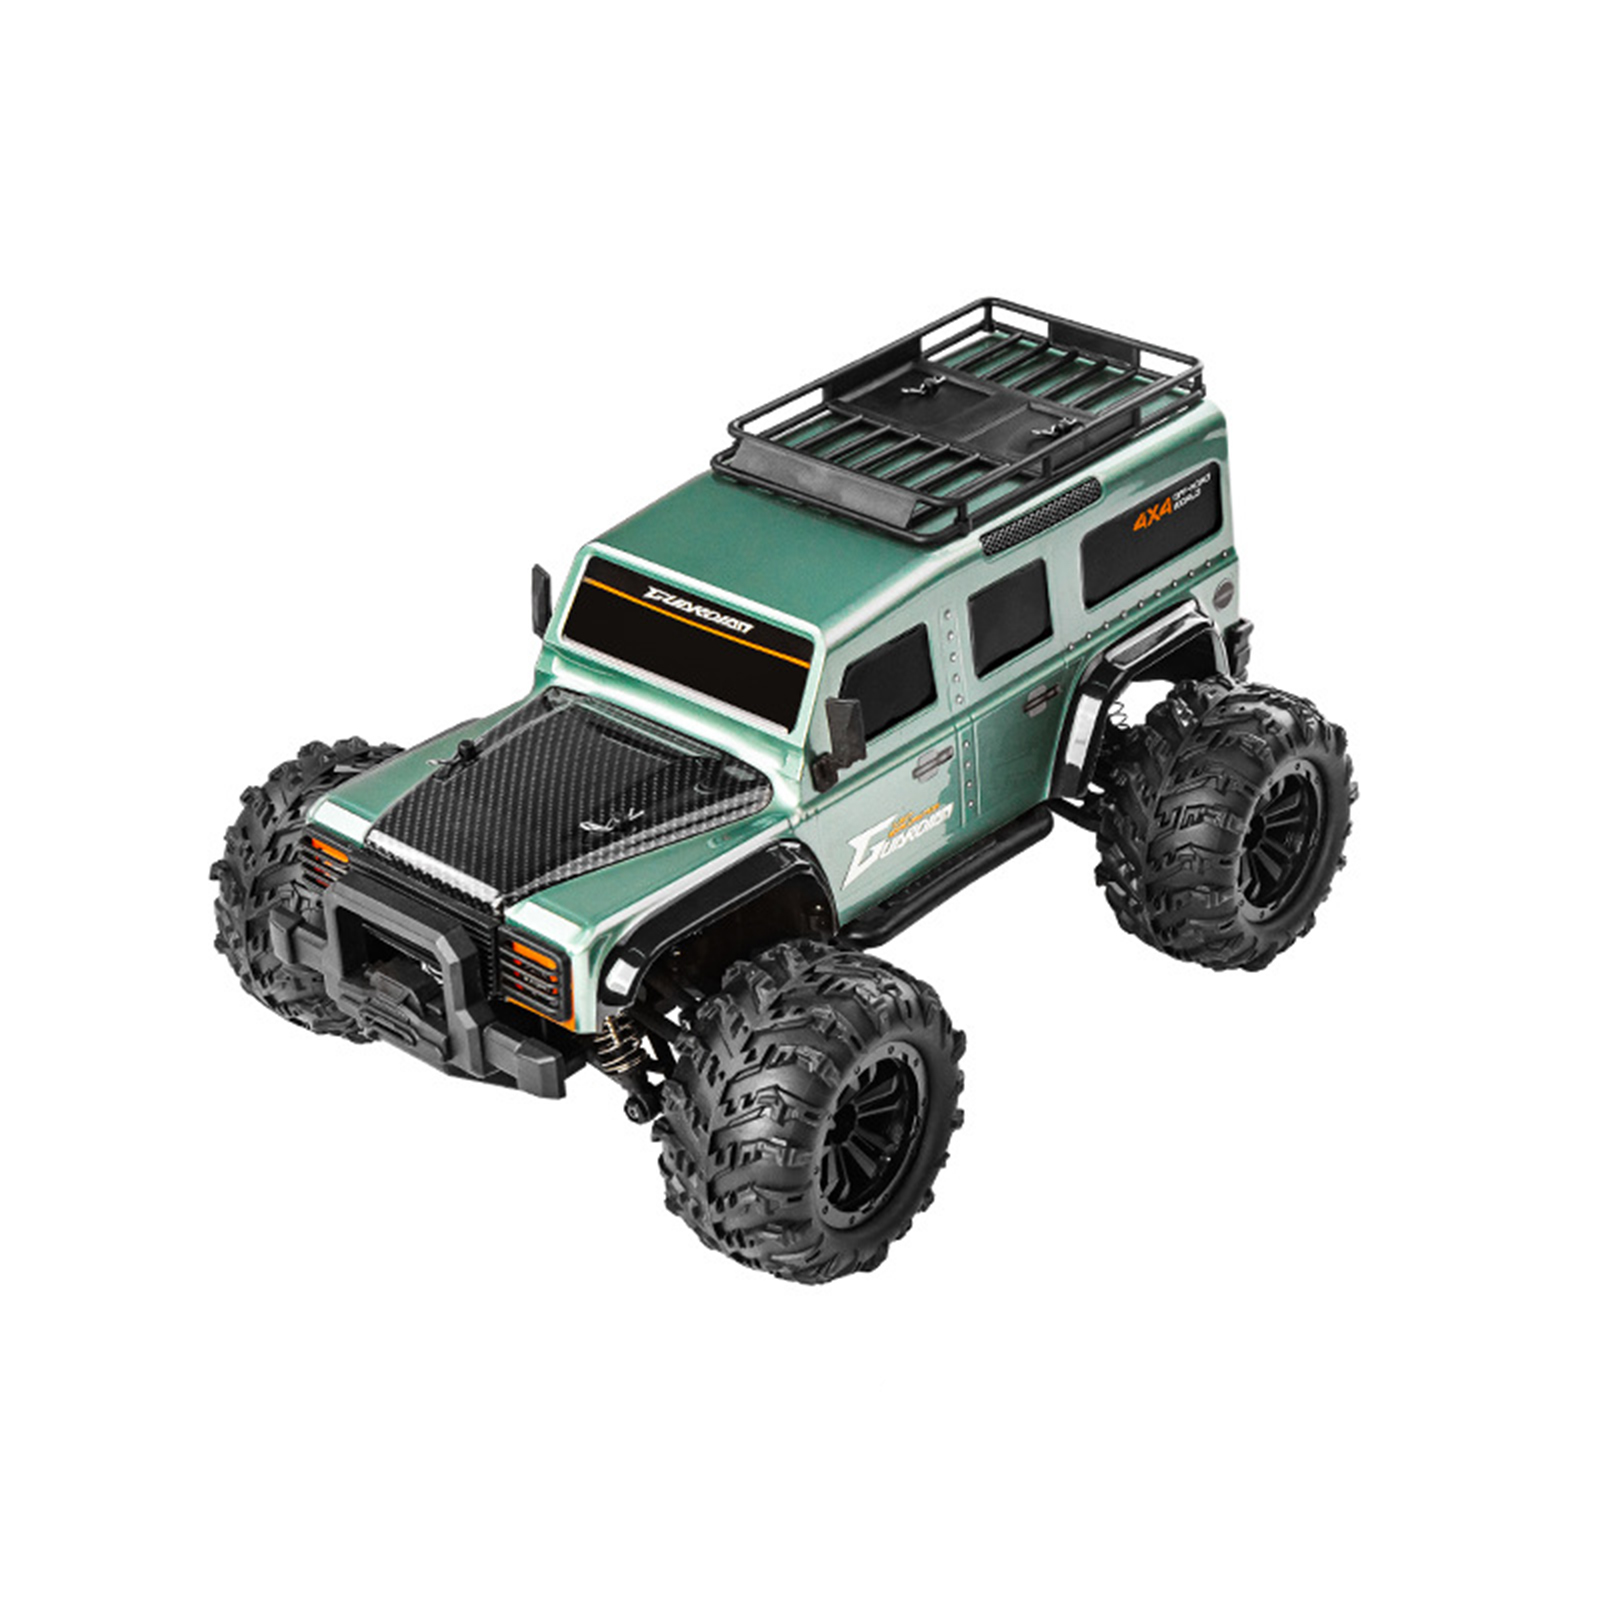 G2201 2.4g Remote Control Car 35km/h High-speed Four-wheel Drive Desert Off-road Vehicle For Boys Birthday Gifts